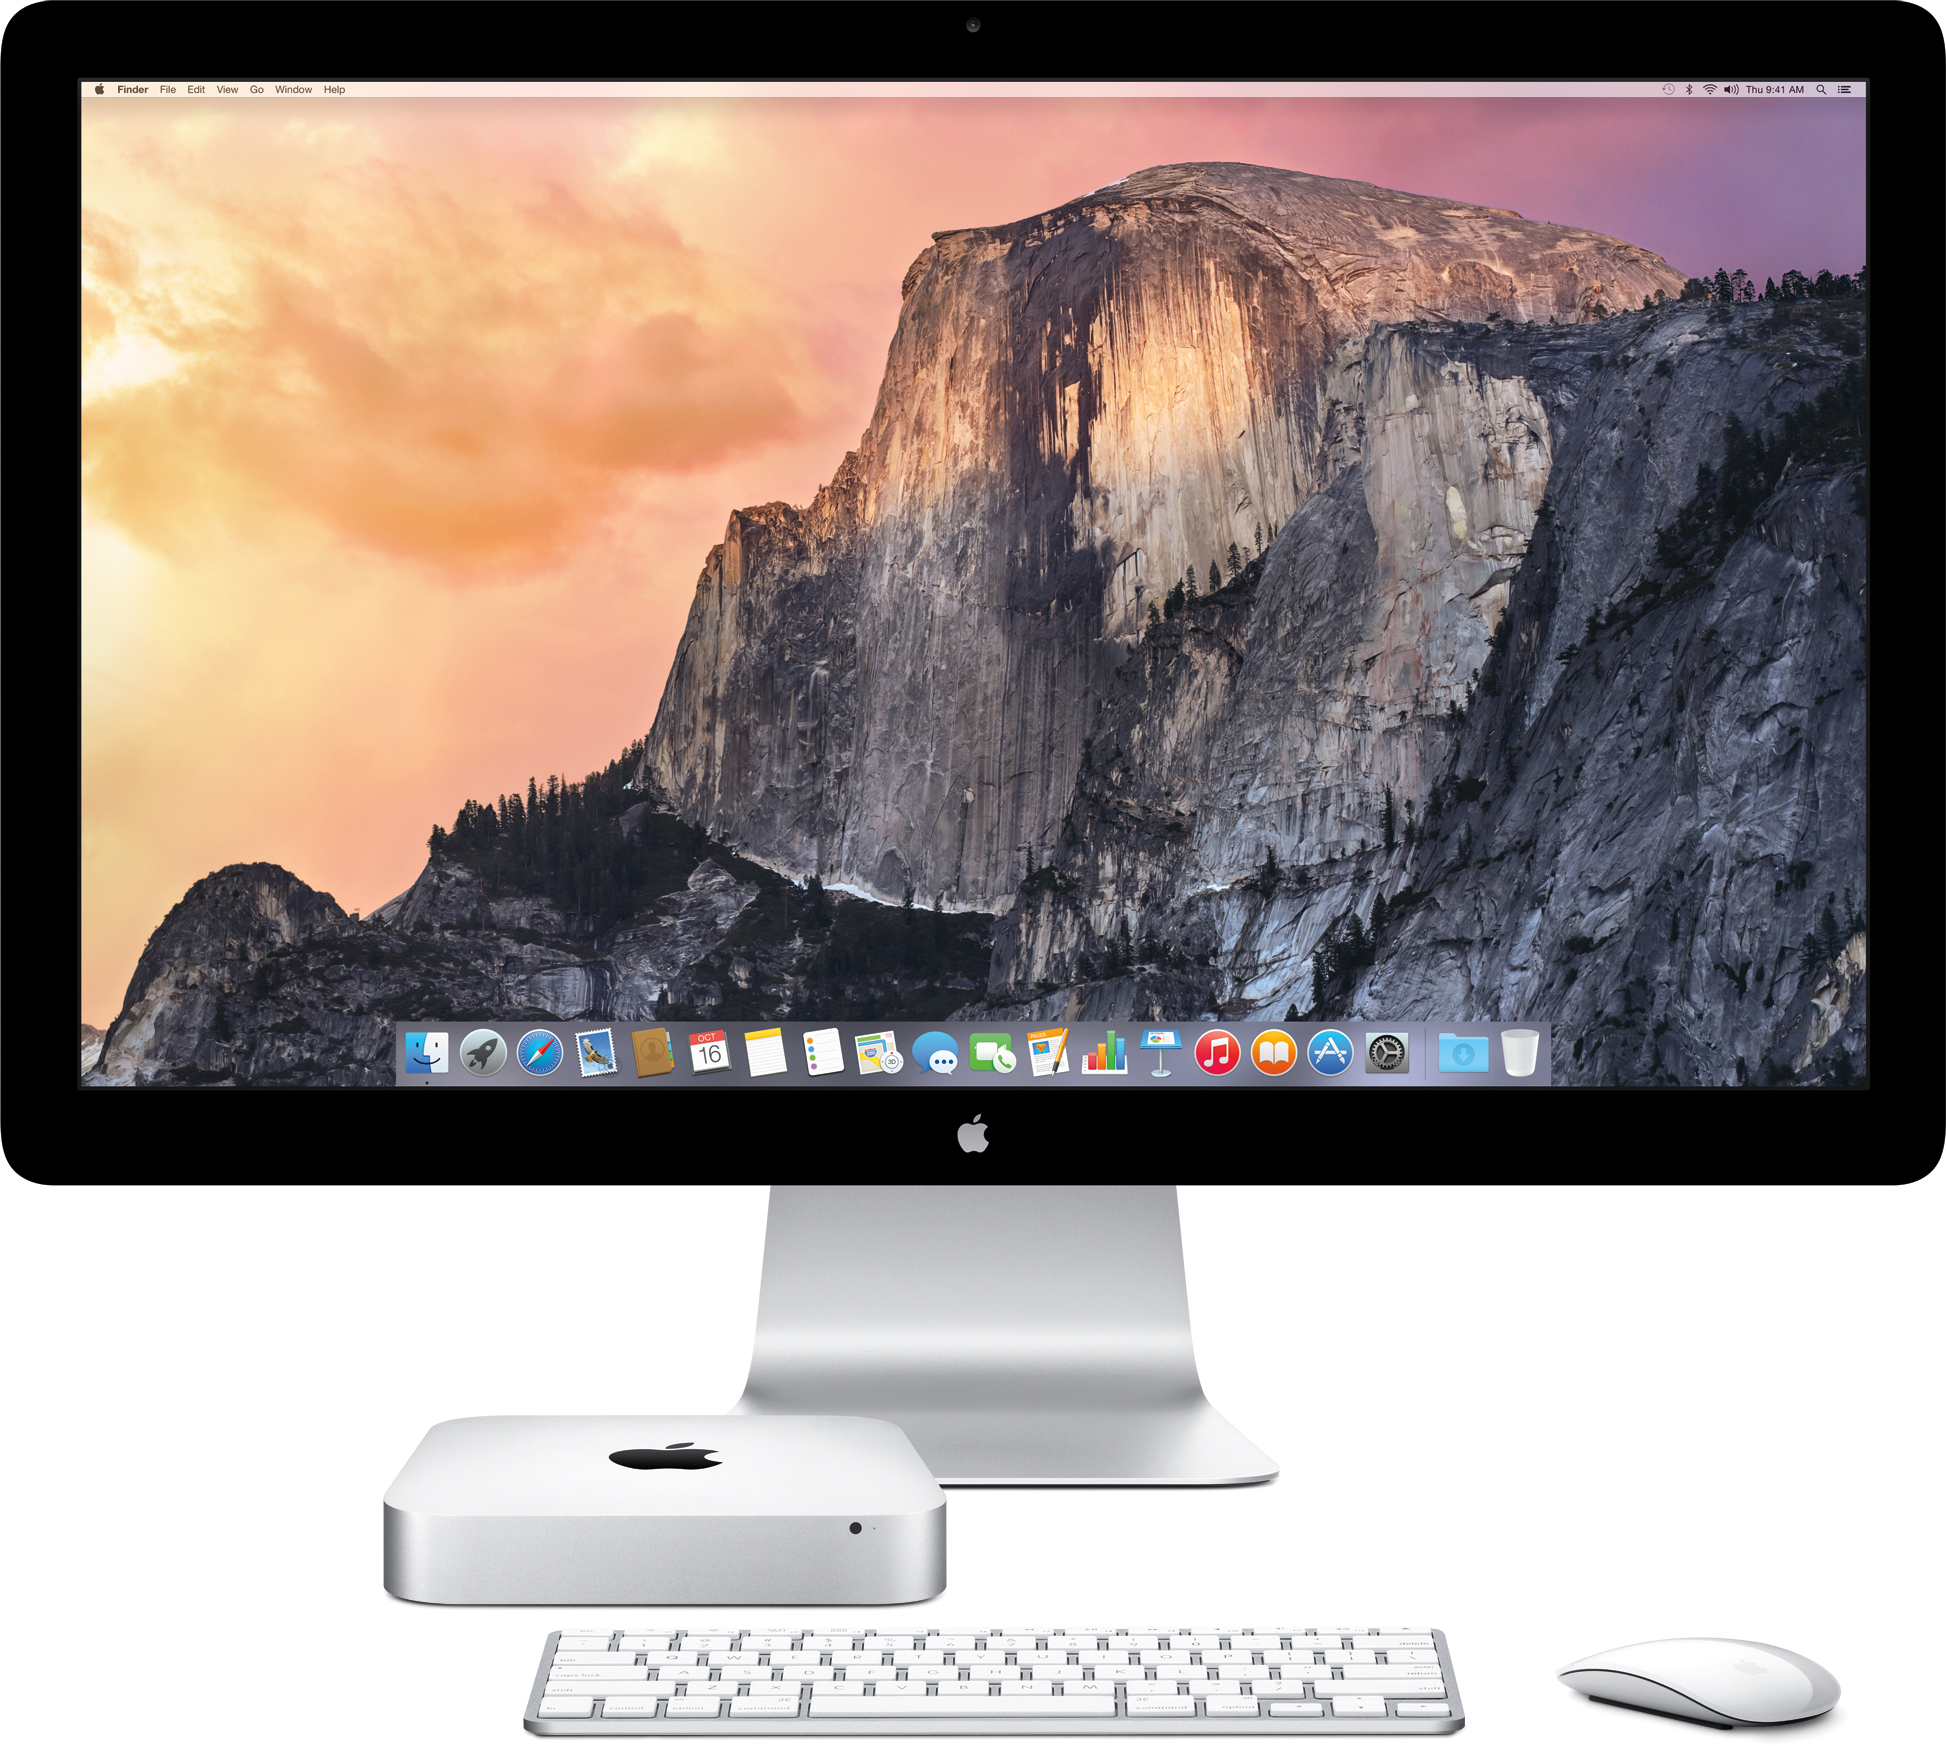 New Mac mini from the front with Thunderbolt Display, keyboard and mouse